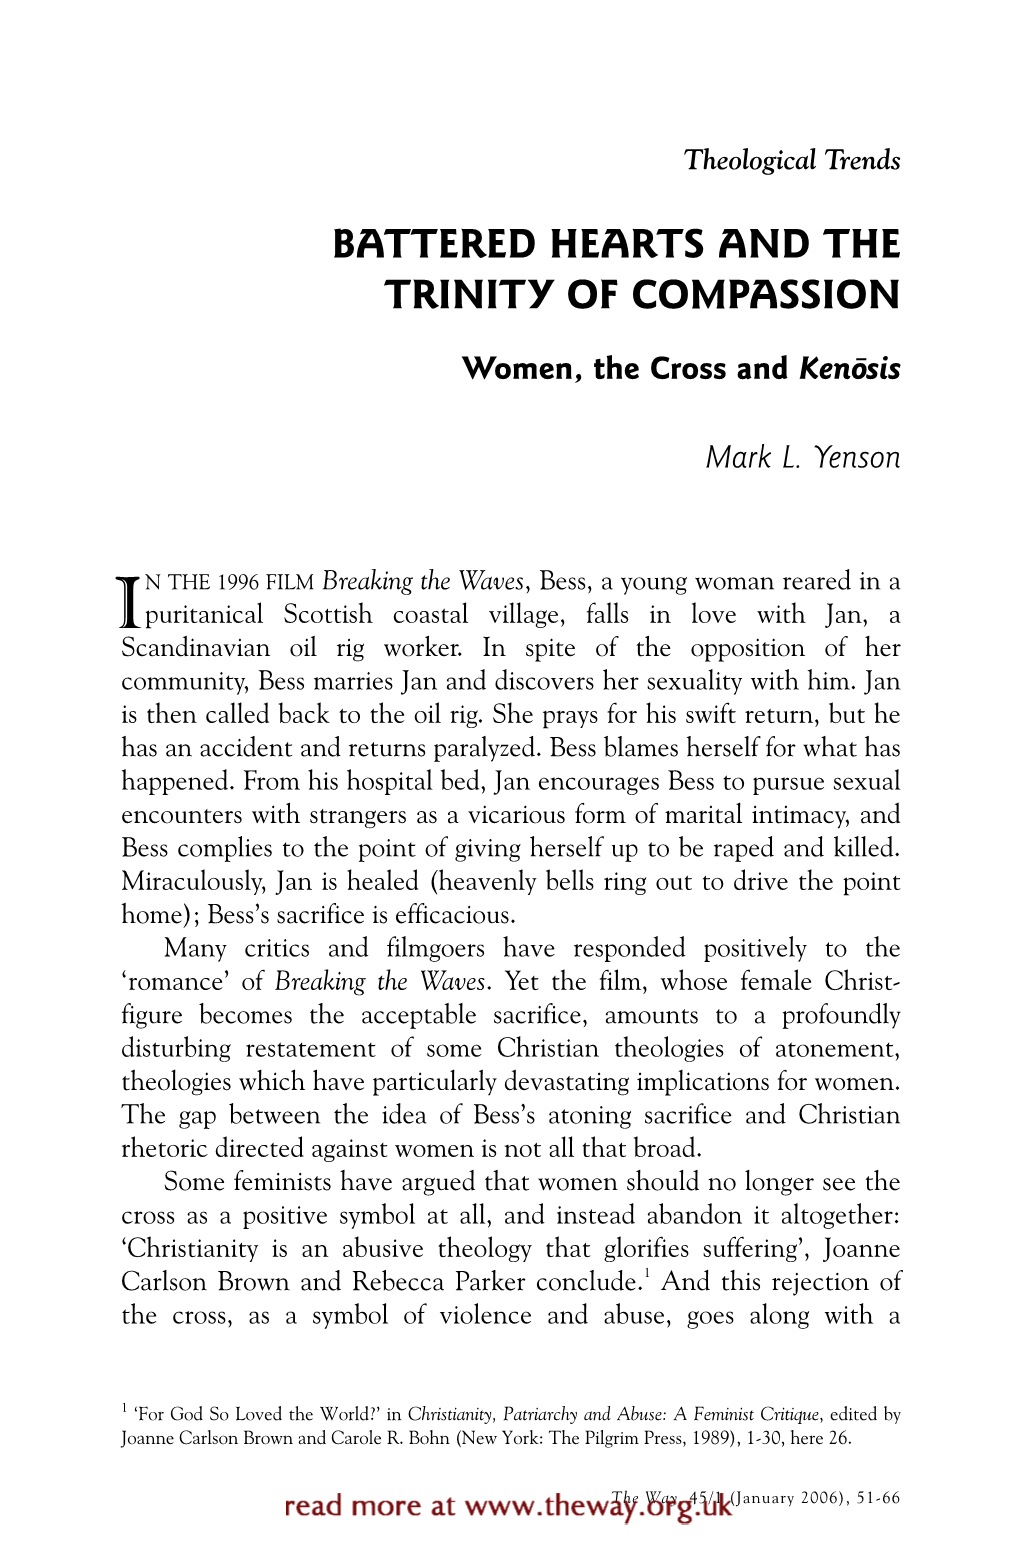 Battered Hearts and the Trinity of Compassion: Women, the Cross and Kenosis